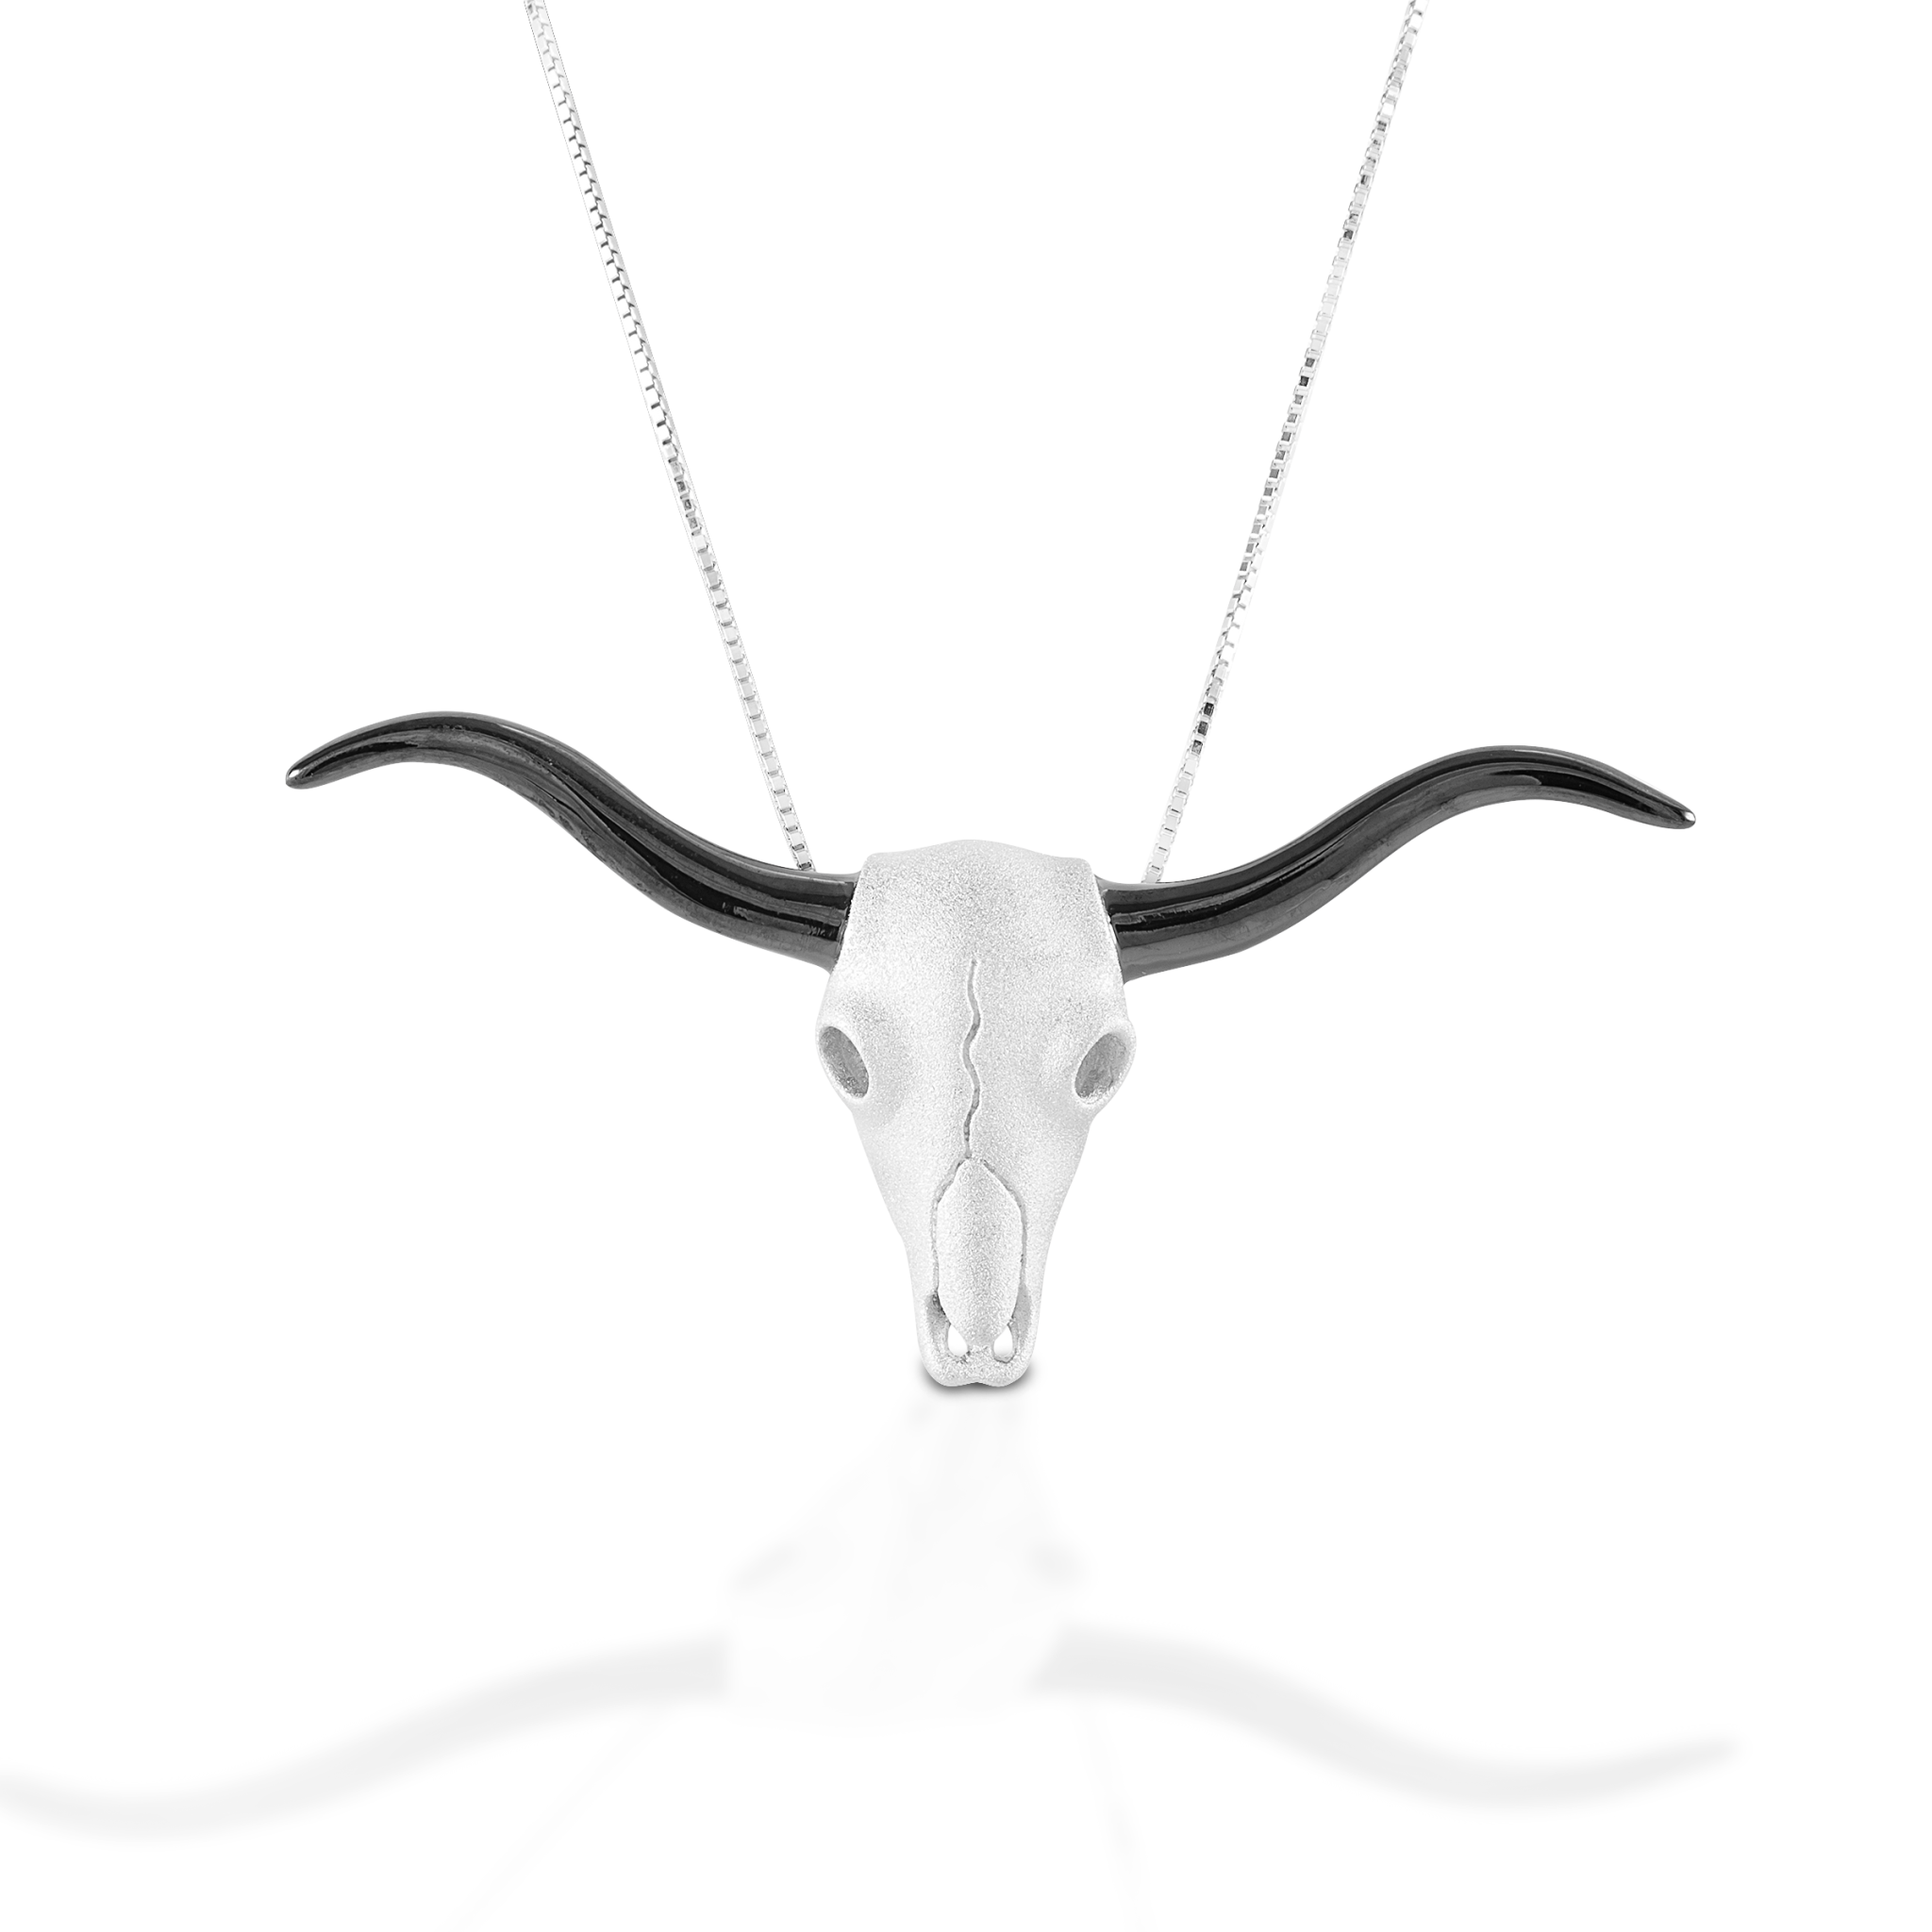 Wildfox Couture Inspired: Diy Bull Skull Necklace · How To Make A Skull  Pendant · Jewelry Making on Cut Out + Keep